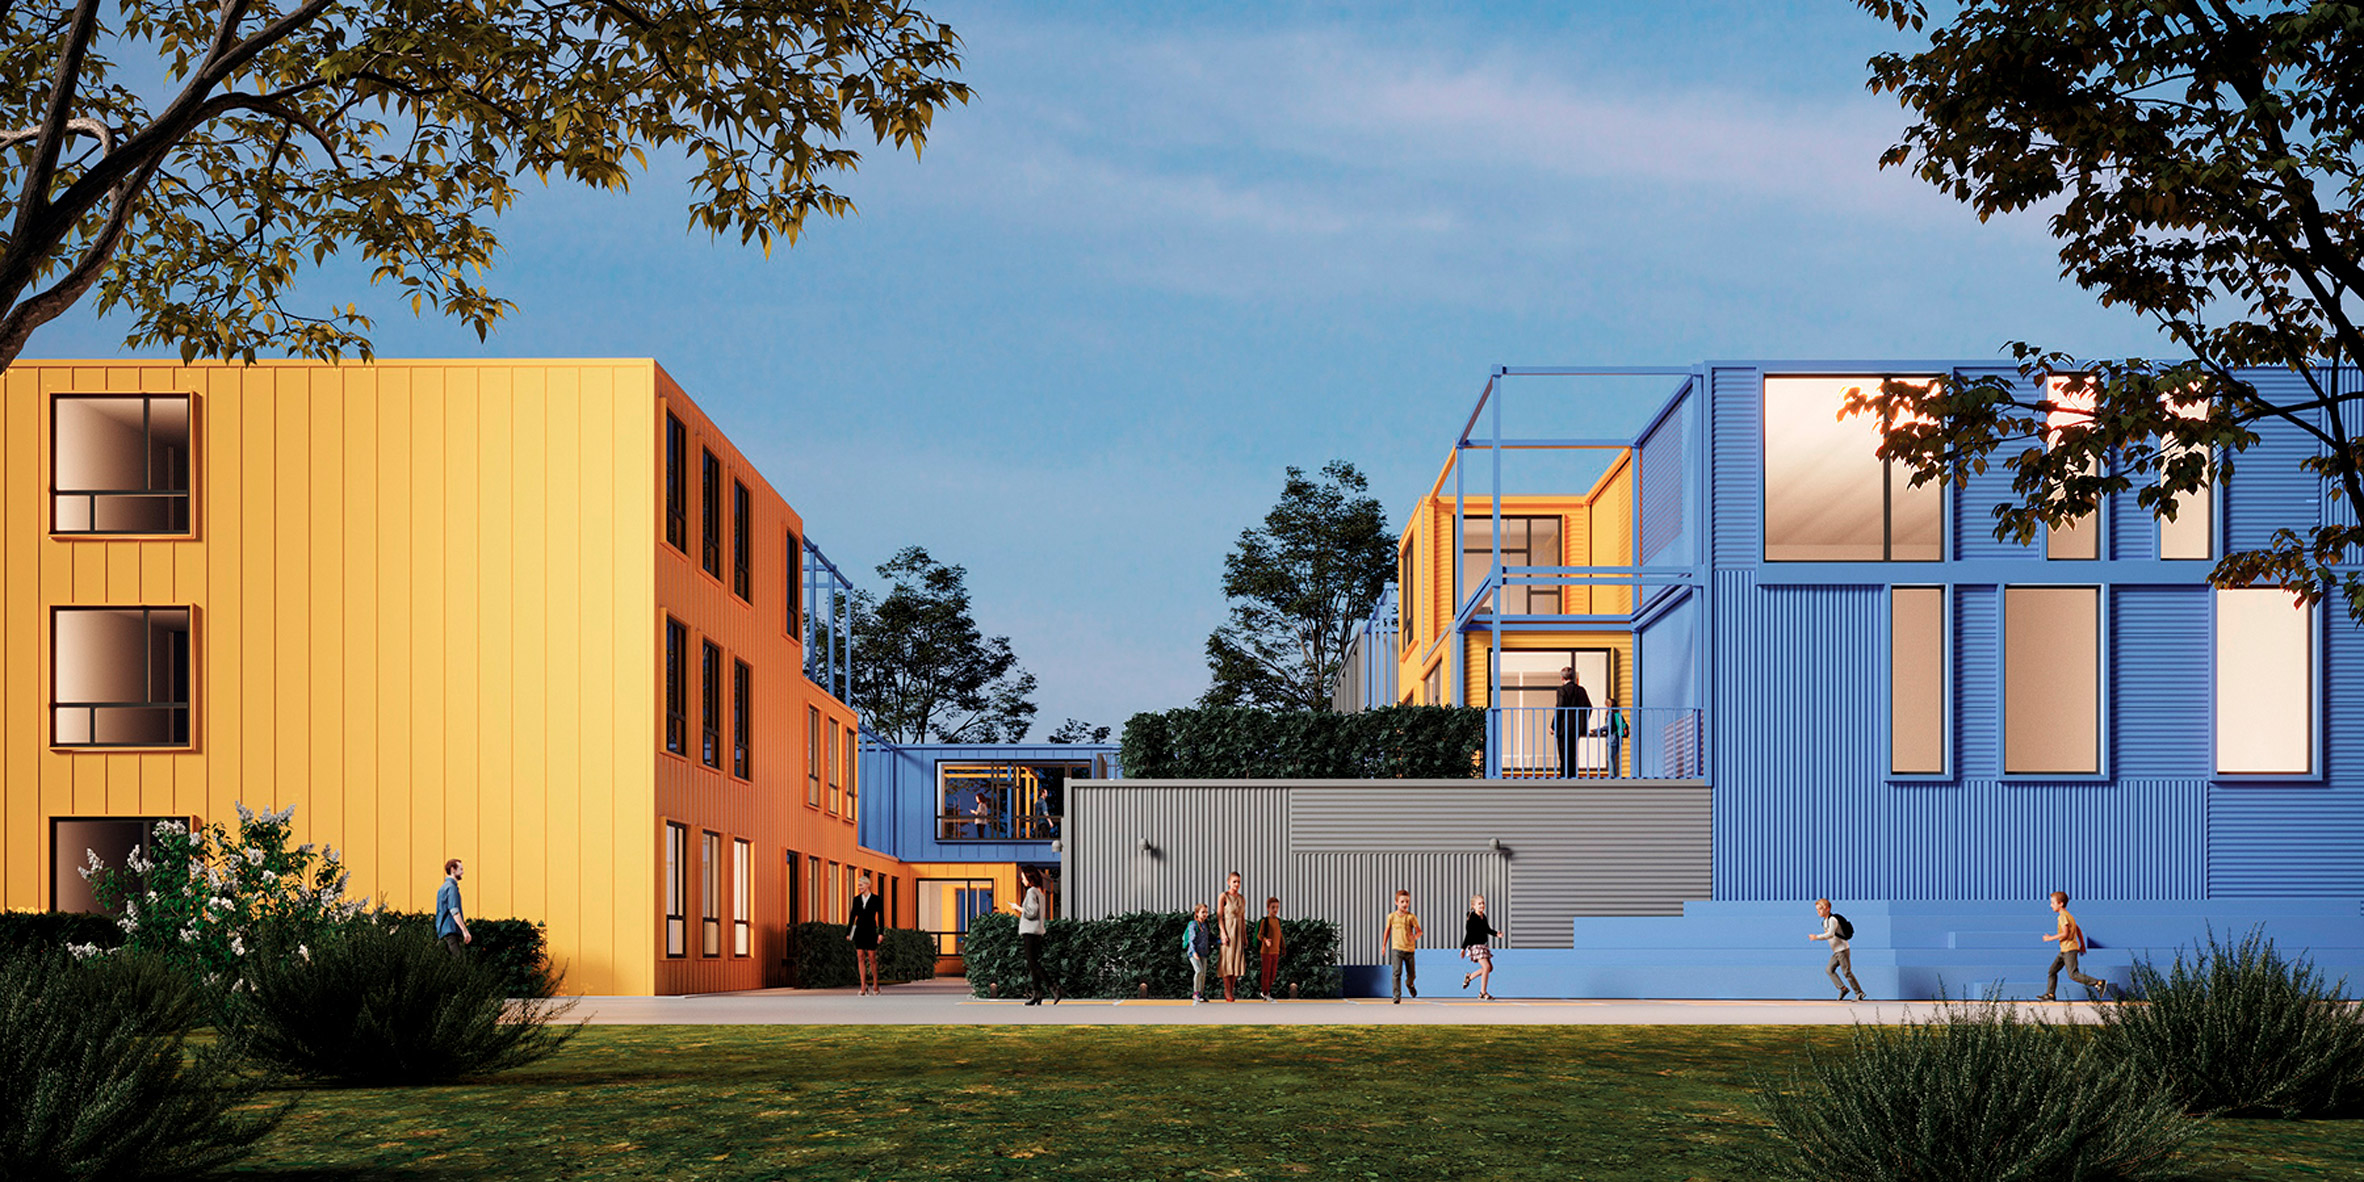 Render of people next to the blue and yellow school building by Zikzak